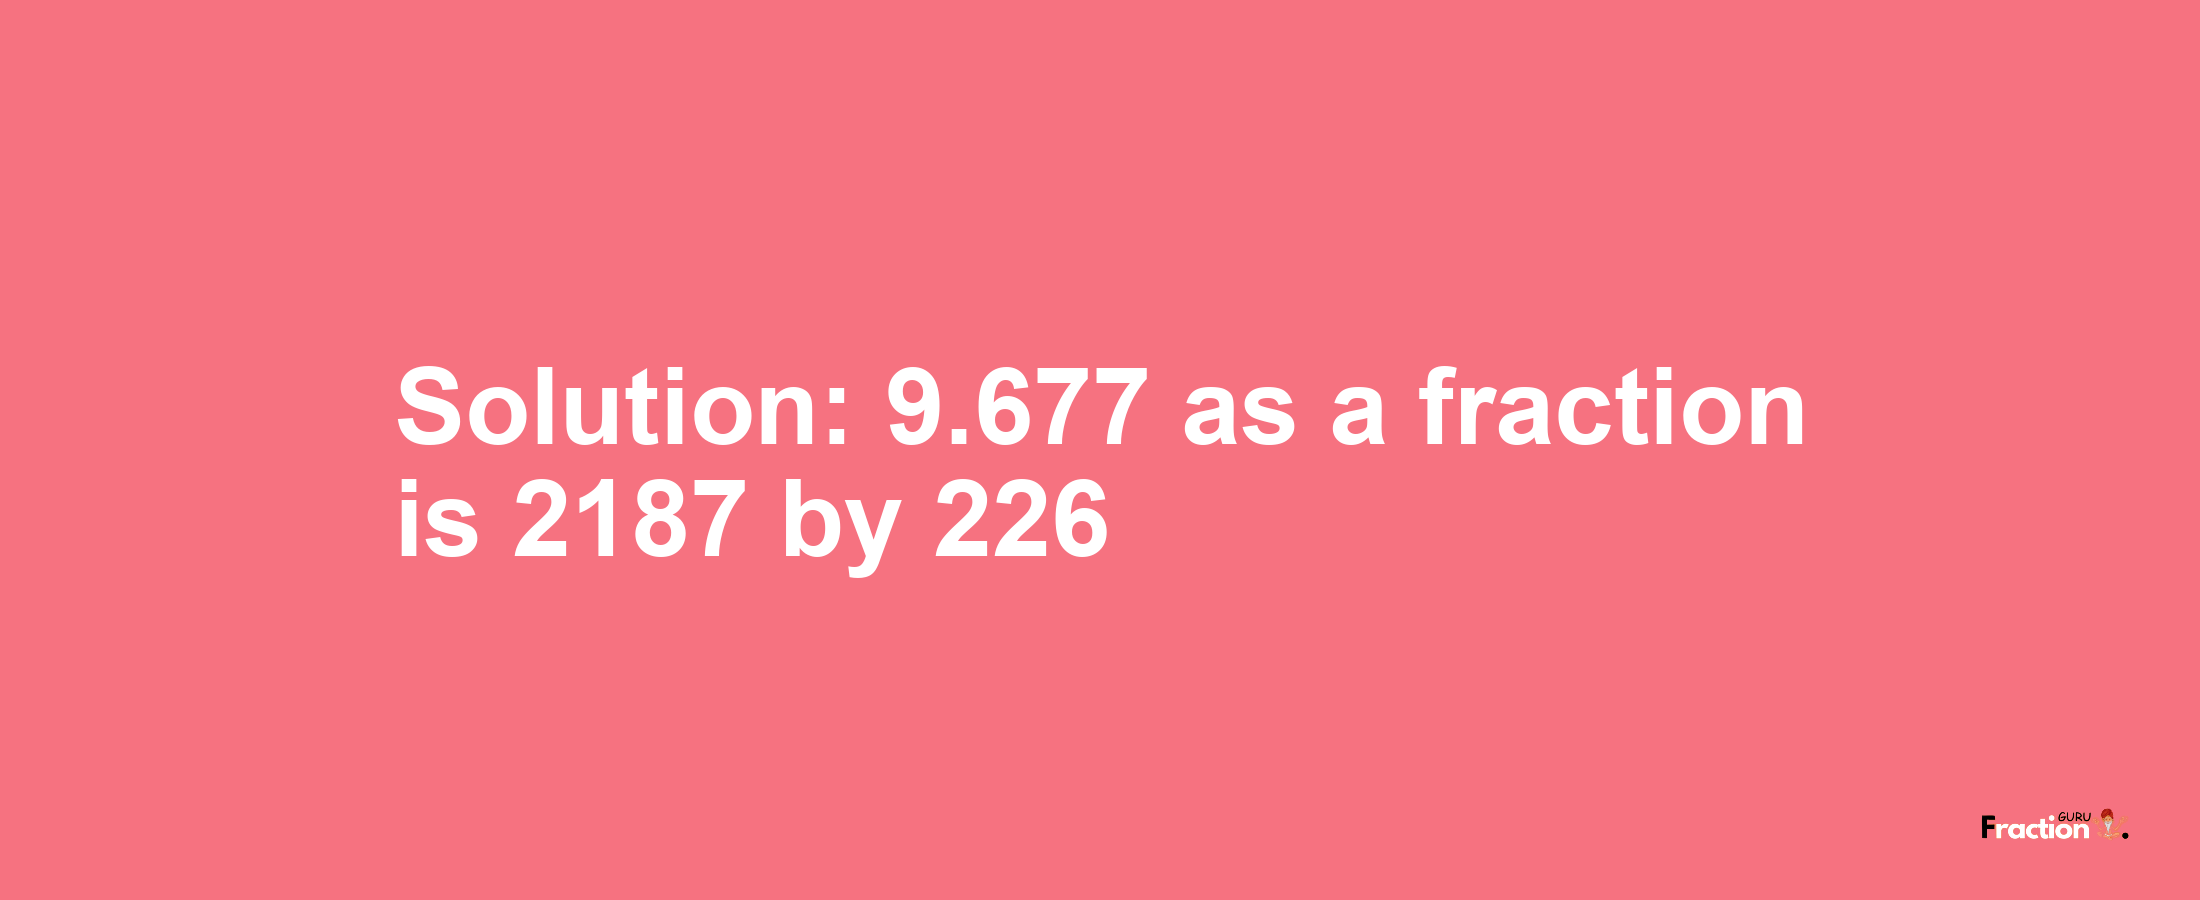 Solution:9.677 as a fraction is 2187/226